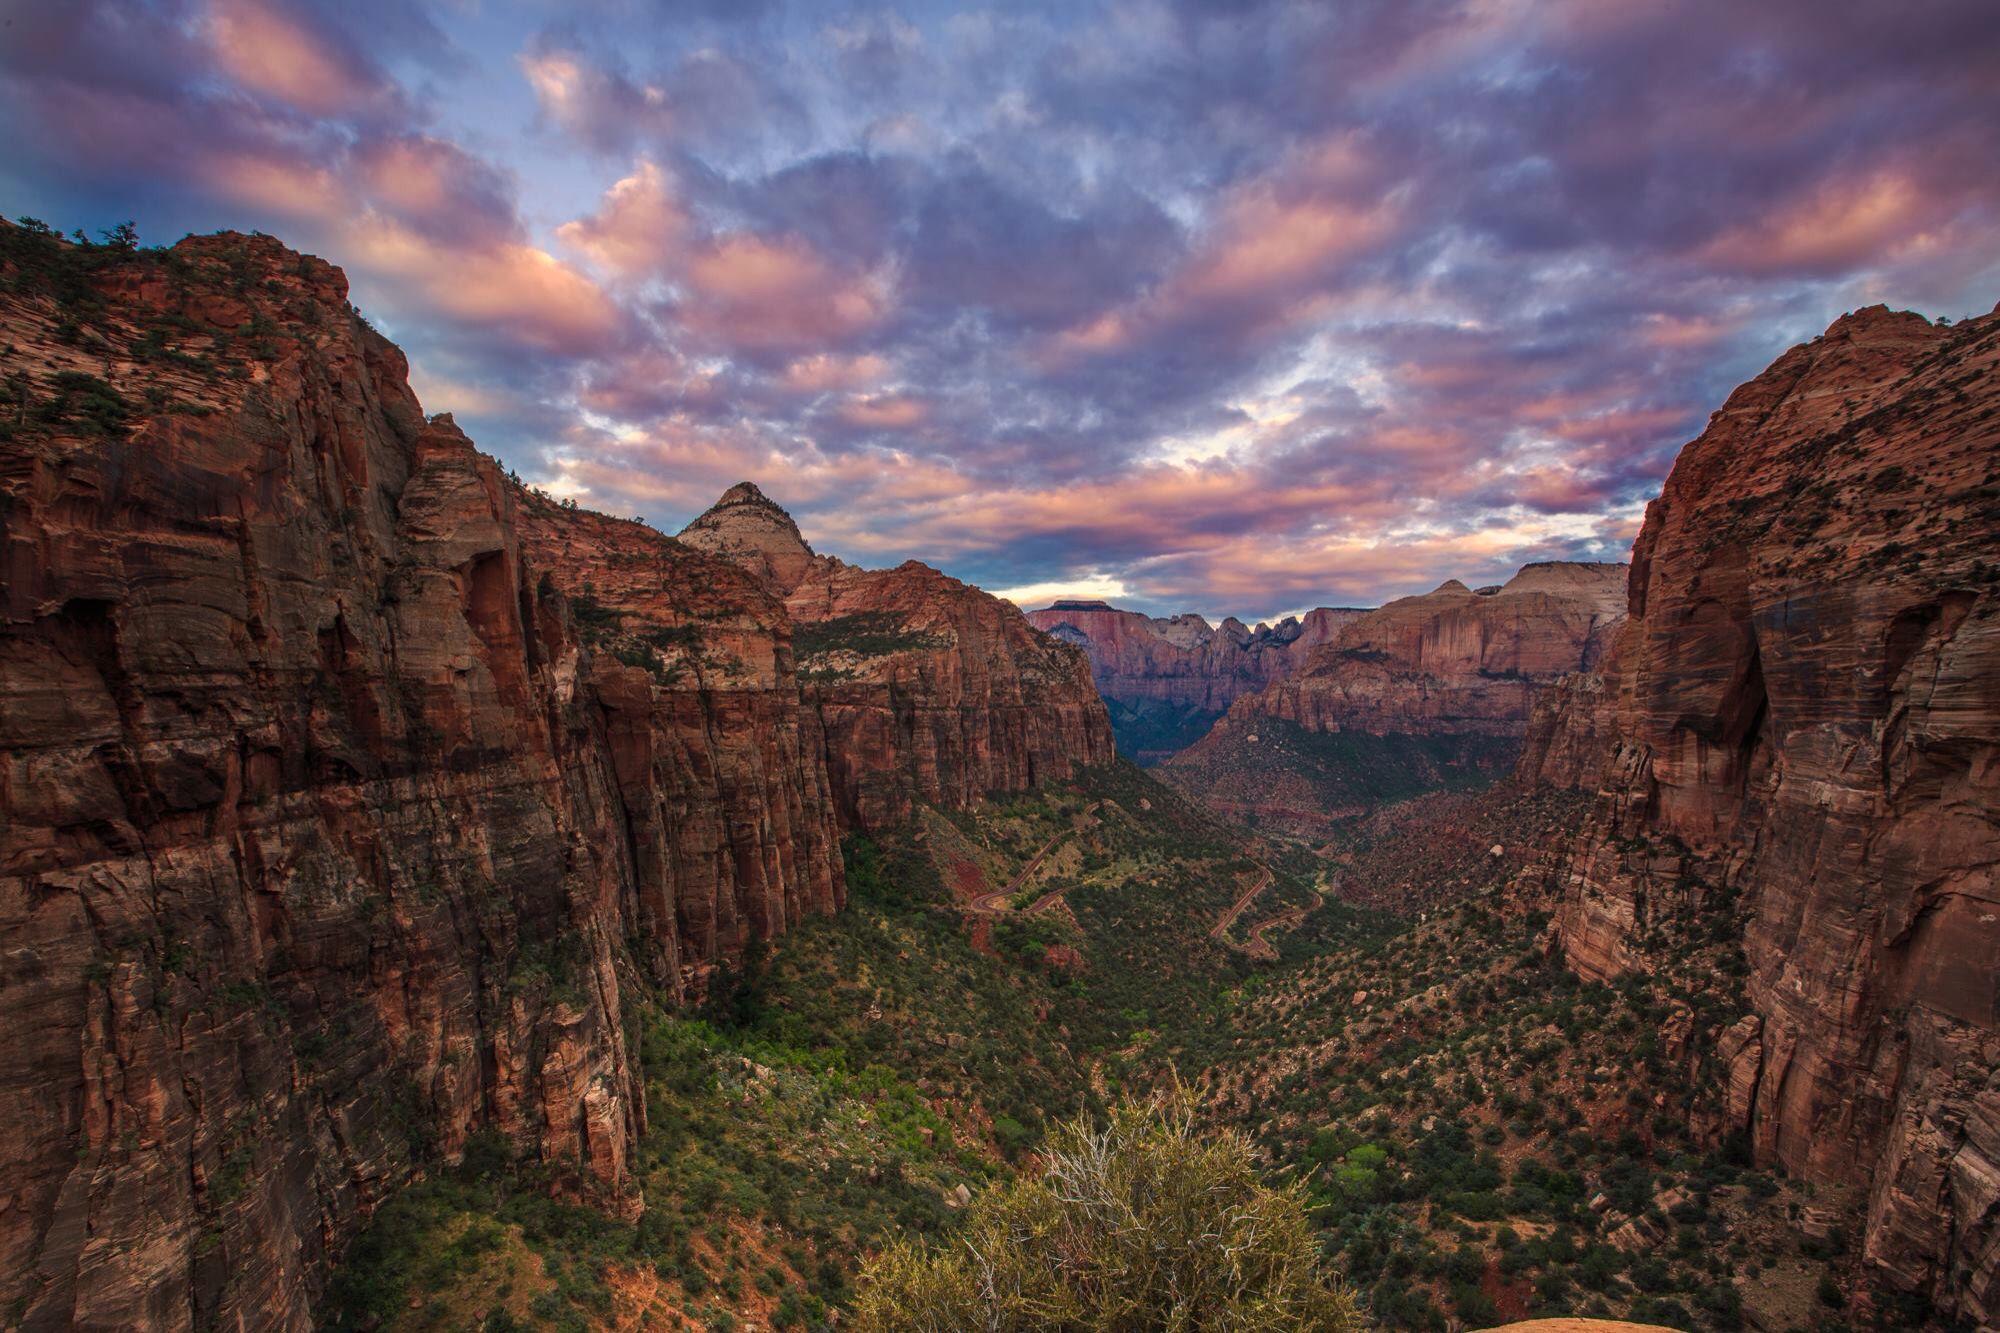 Sunrise over Zion National Park, at the end of the Canyon